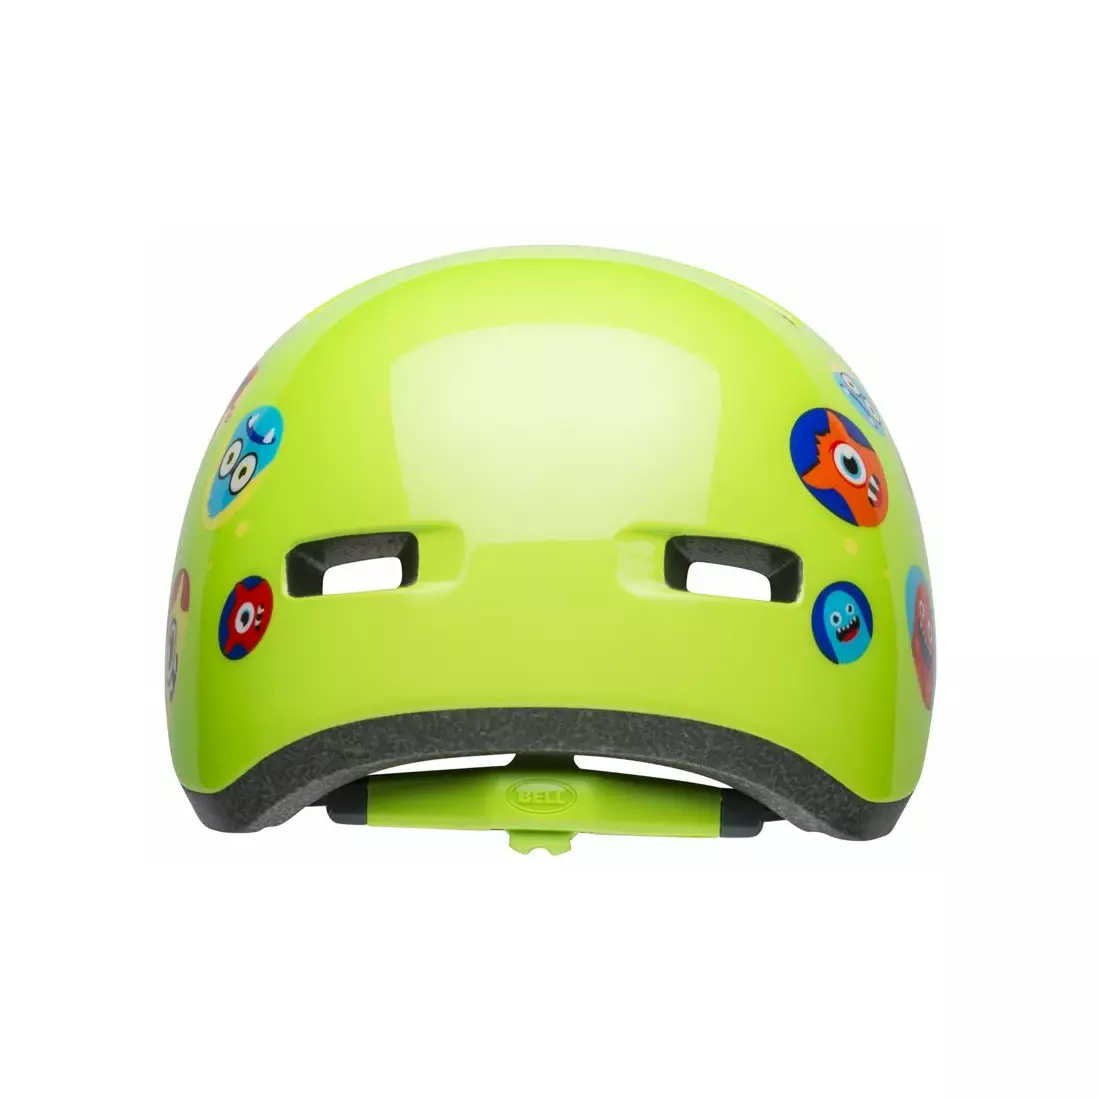 BELL LIL RIPPER Kask rowerowy dziecięcy, monsters gloss green